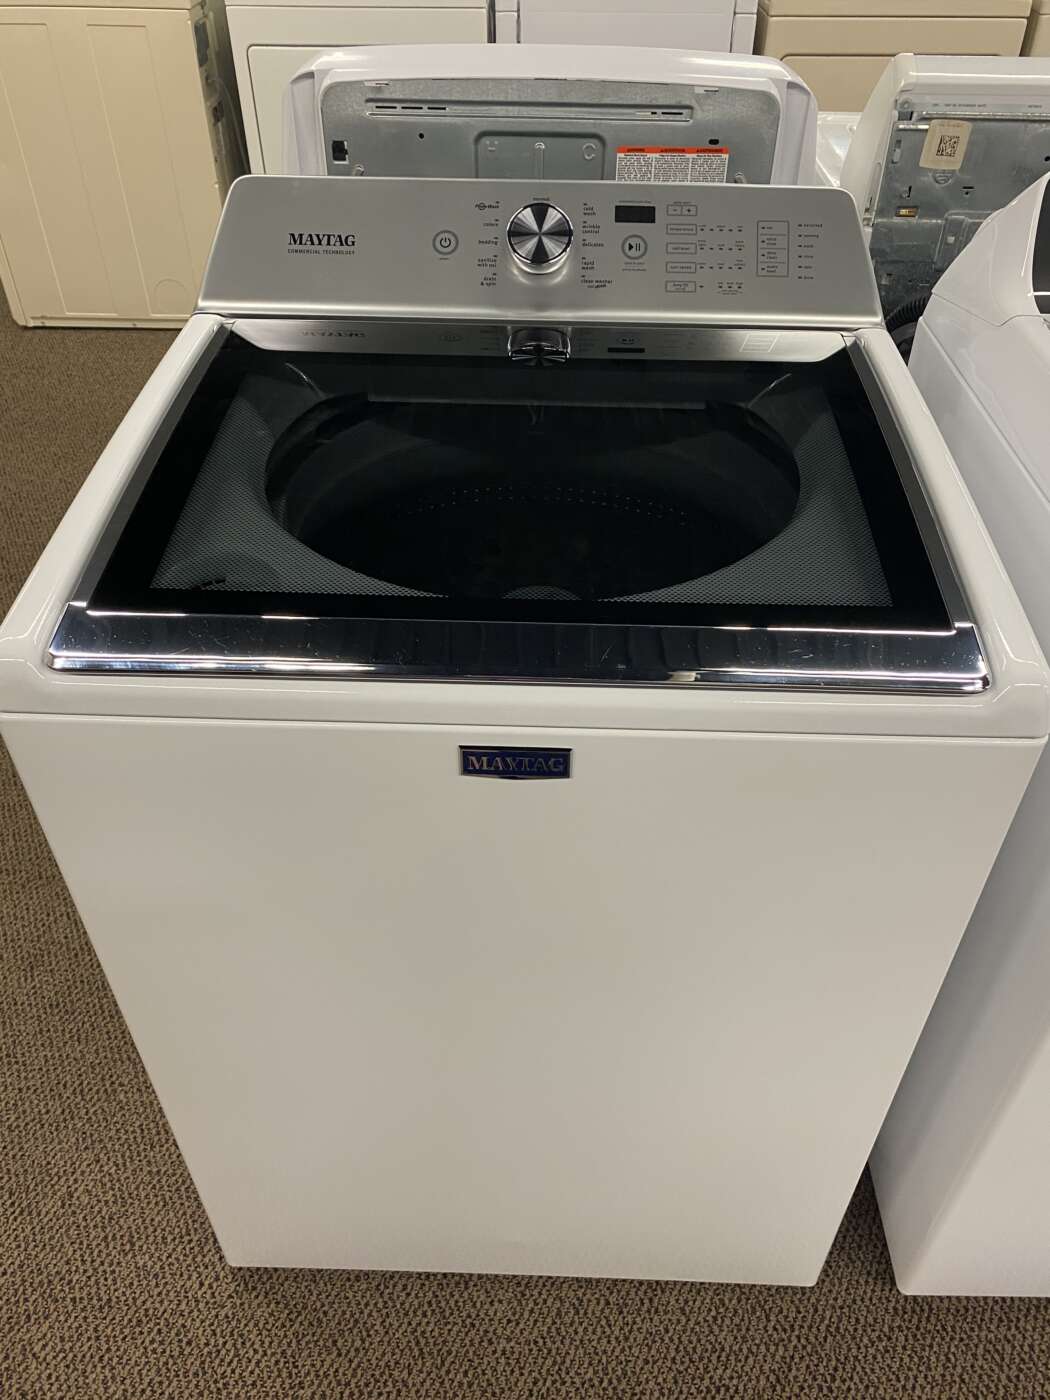 Reconditioned MAYTAG 4.7 Cu. Ft Top-Load